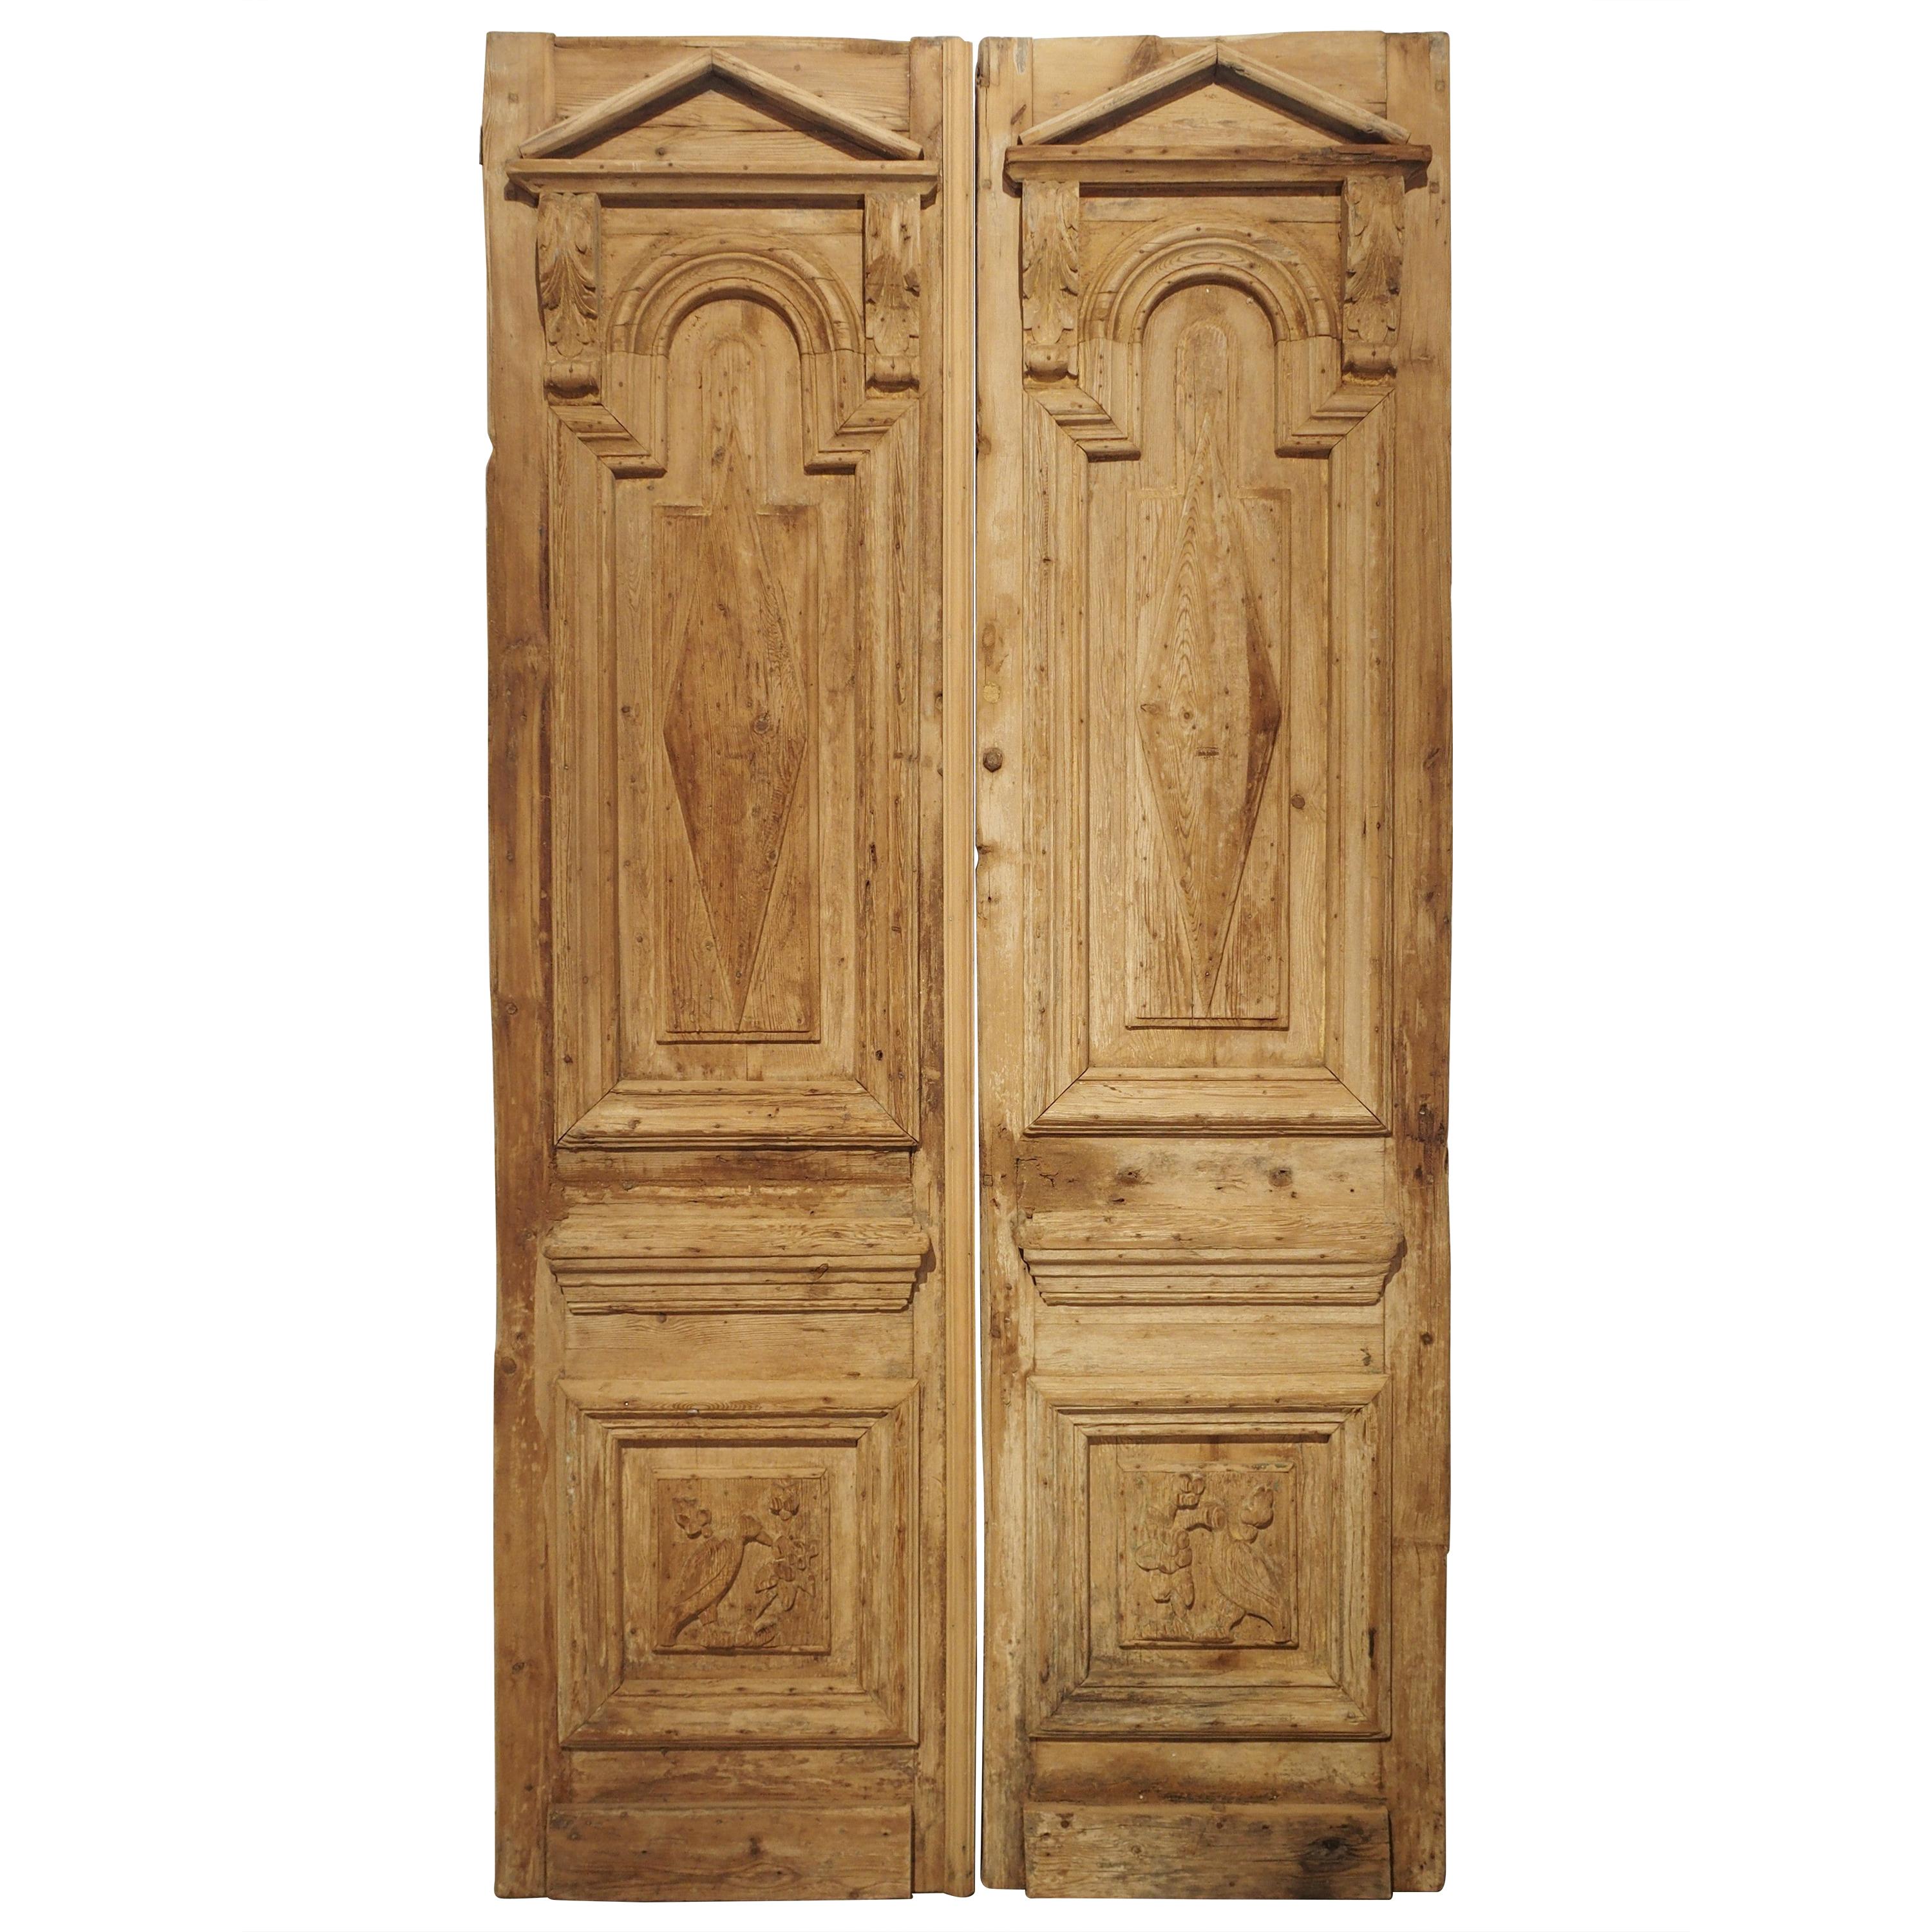 Pair of Antique French Egyptian Pine Doors with Carved Bird Motifs